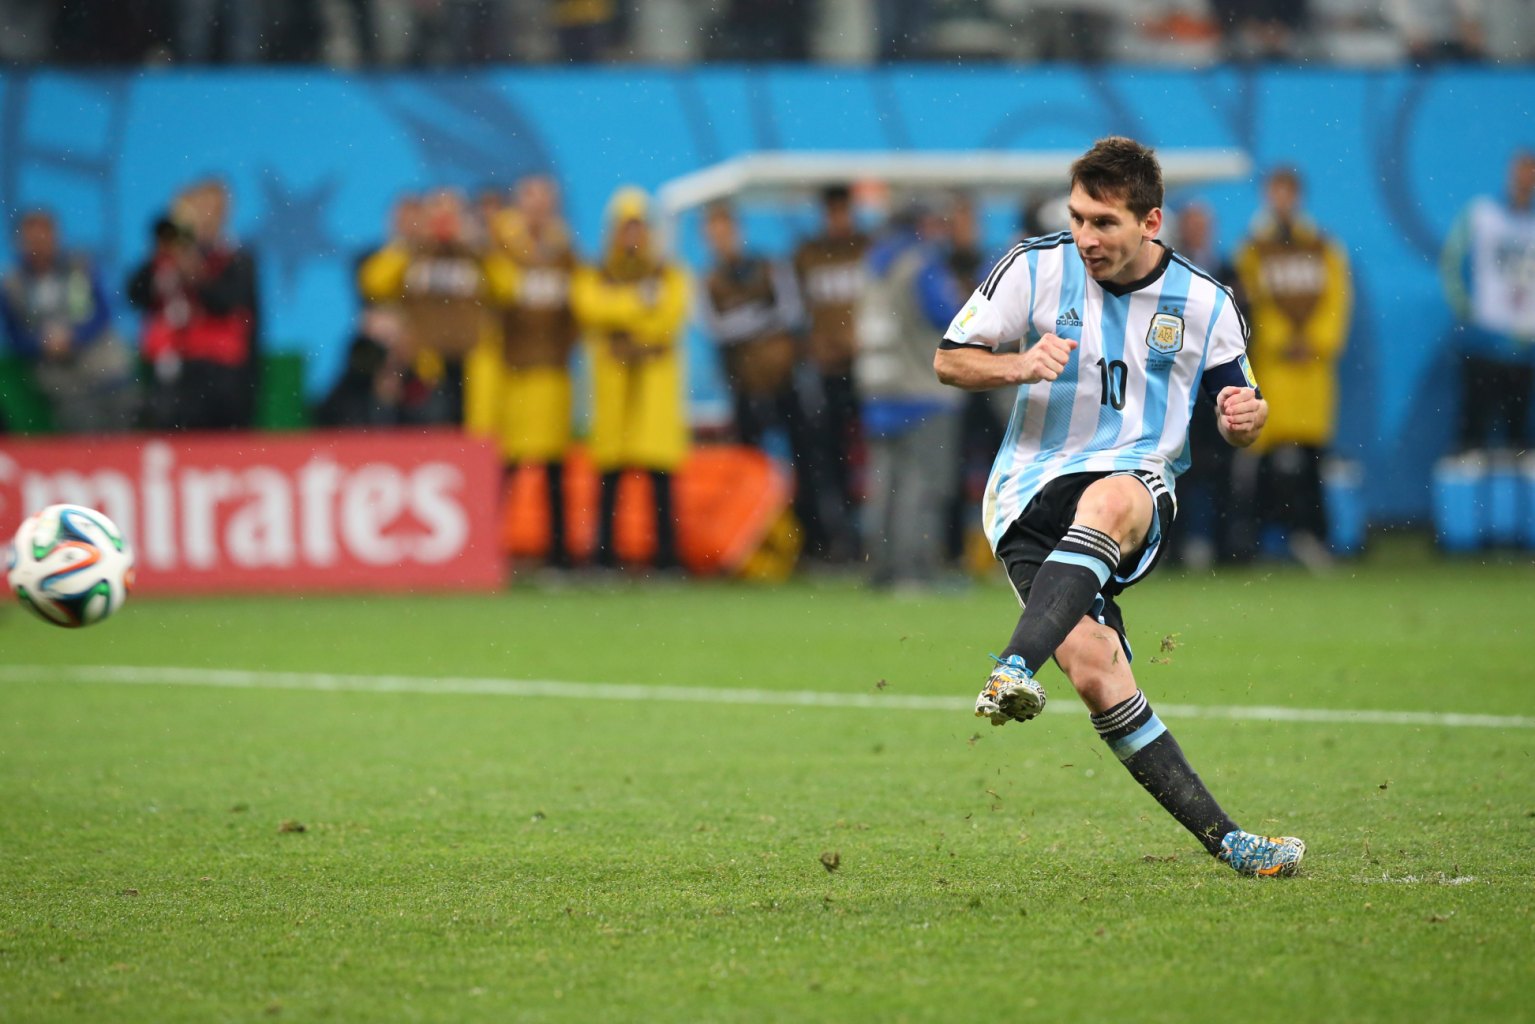 FIFA World Cup 2014: Lionel Messi's passage into the pantheon?